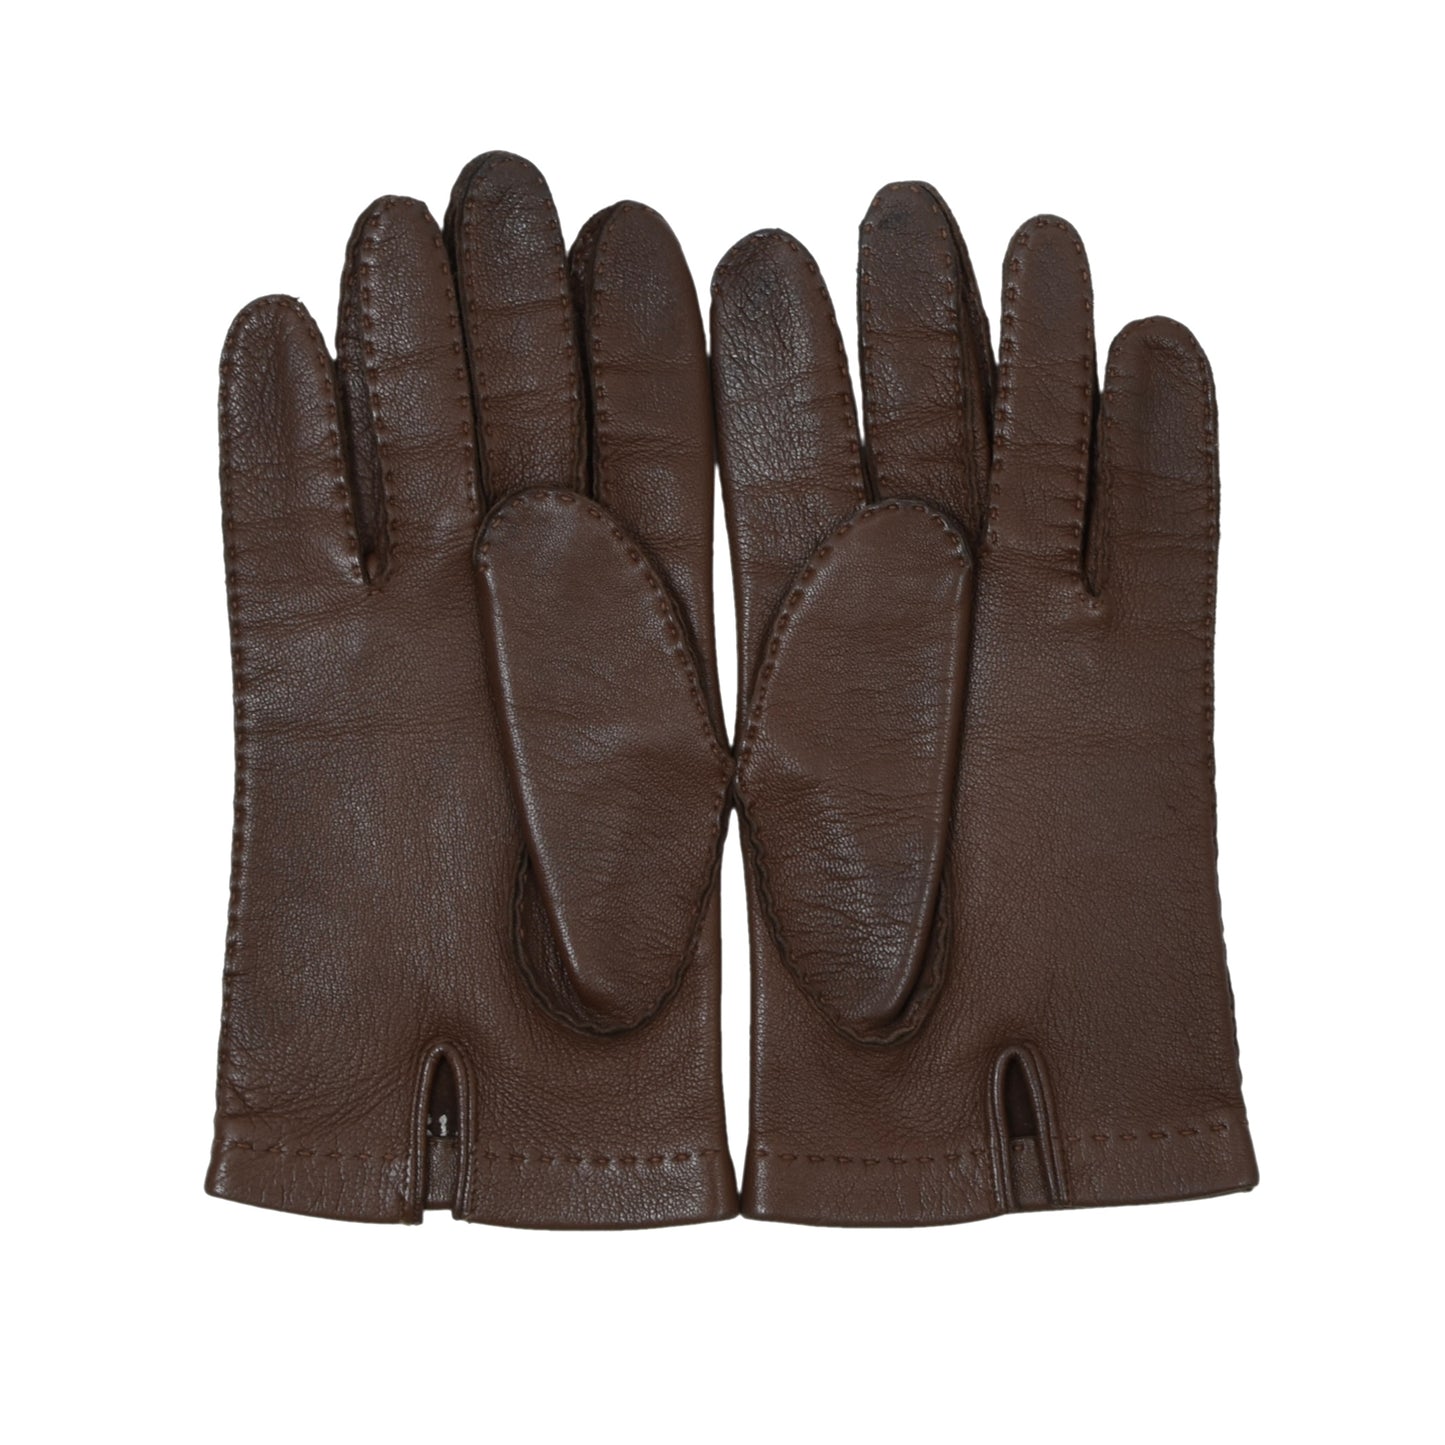 Classic Unlined Leather Gloves Size 8 1/4 - Brown